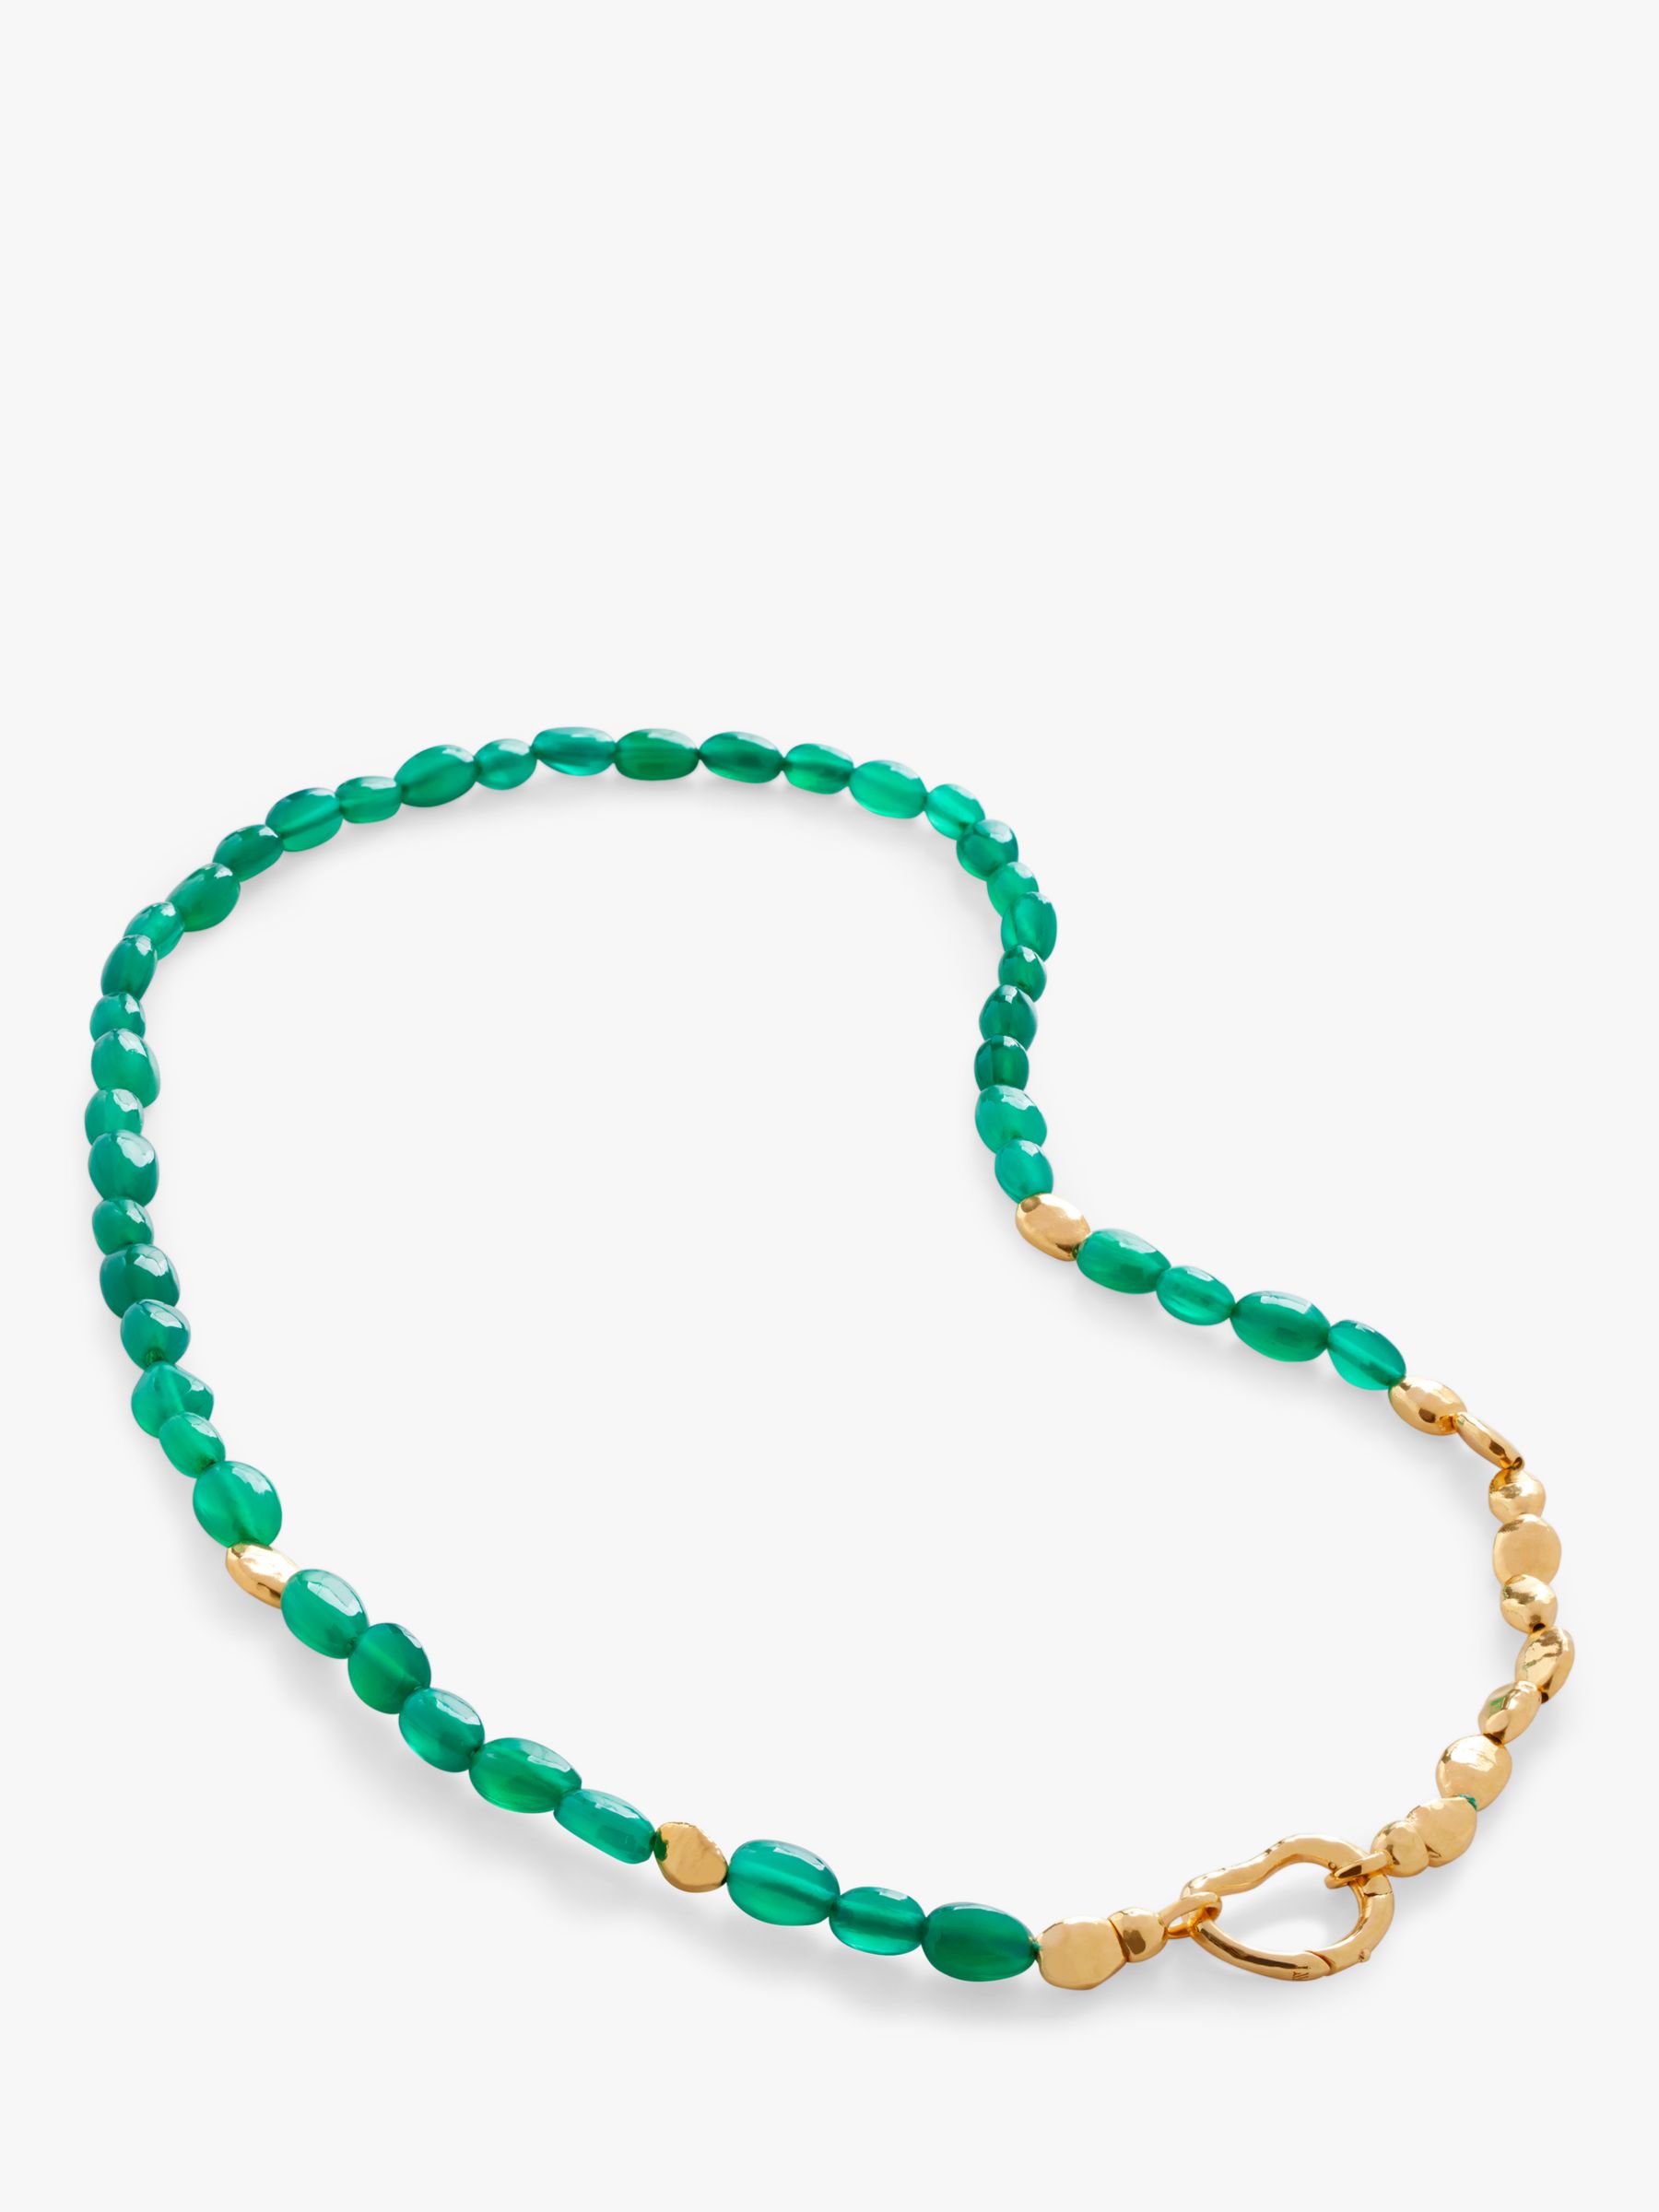 Monica Vinader Rio Beaded Mix Necklace, Gold/Green Onyx